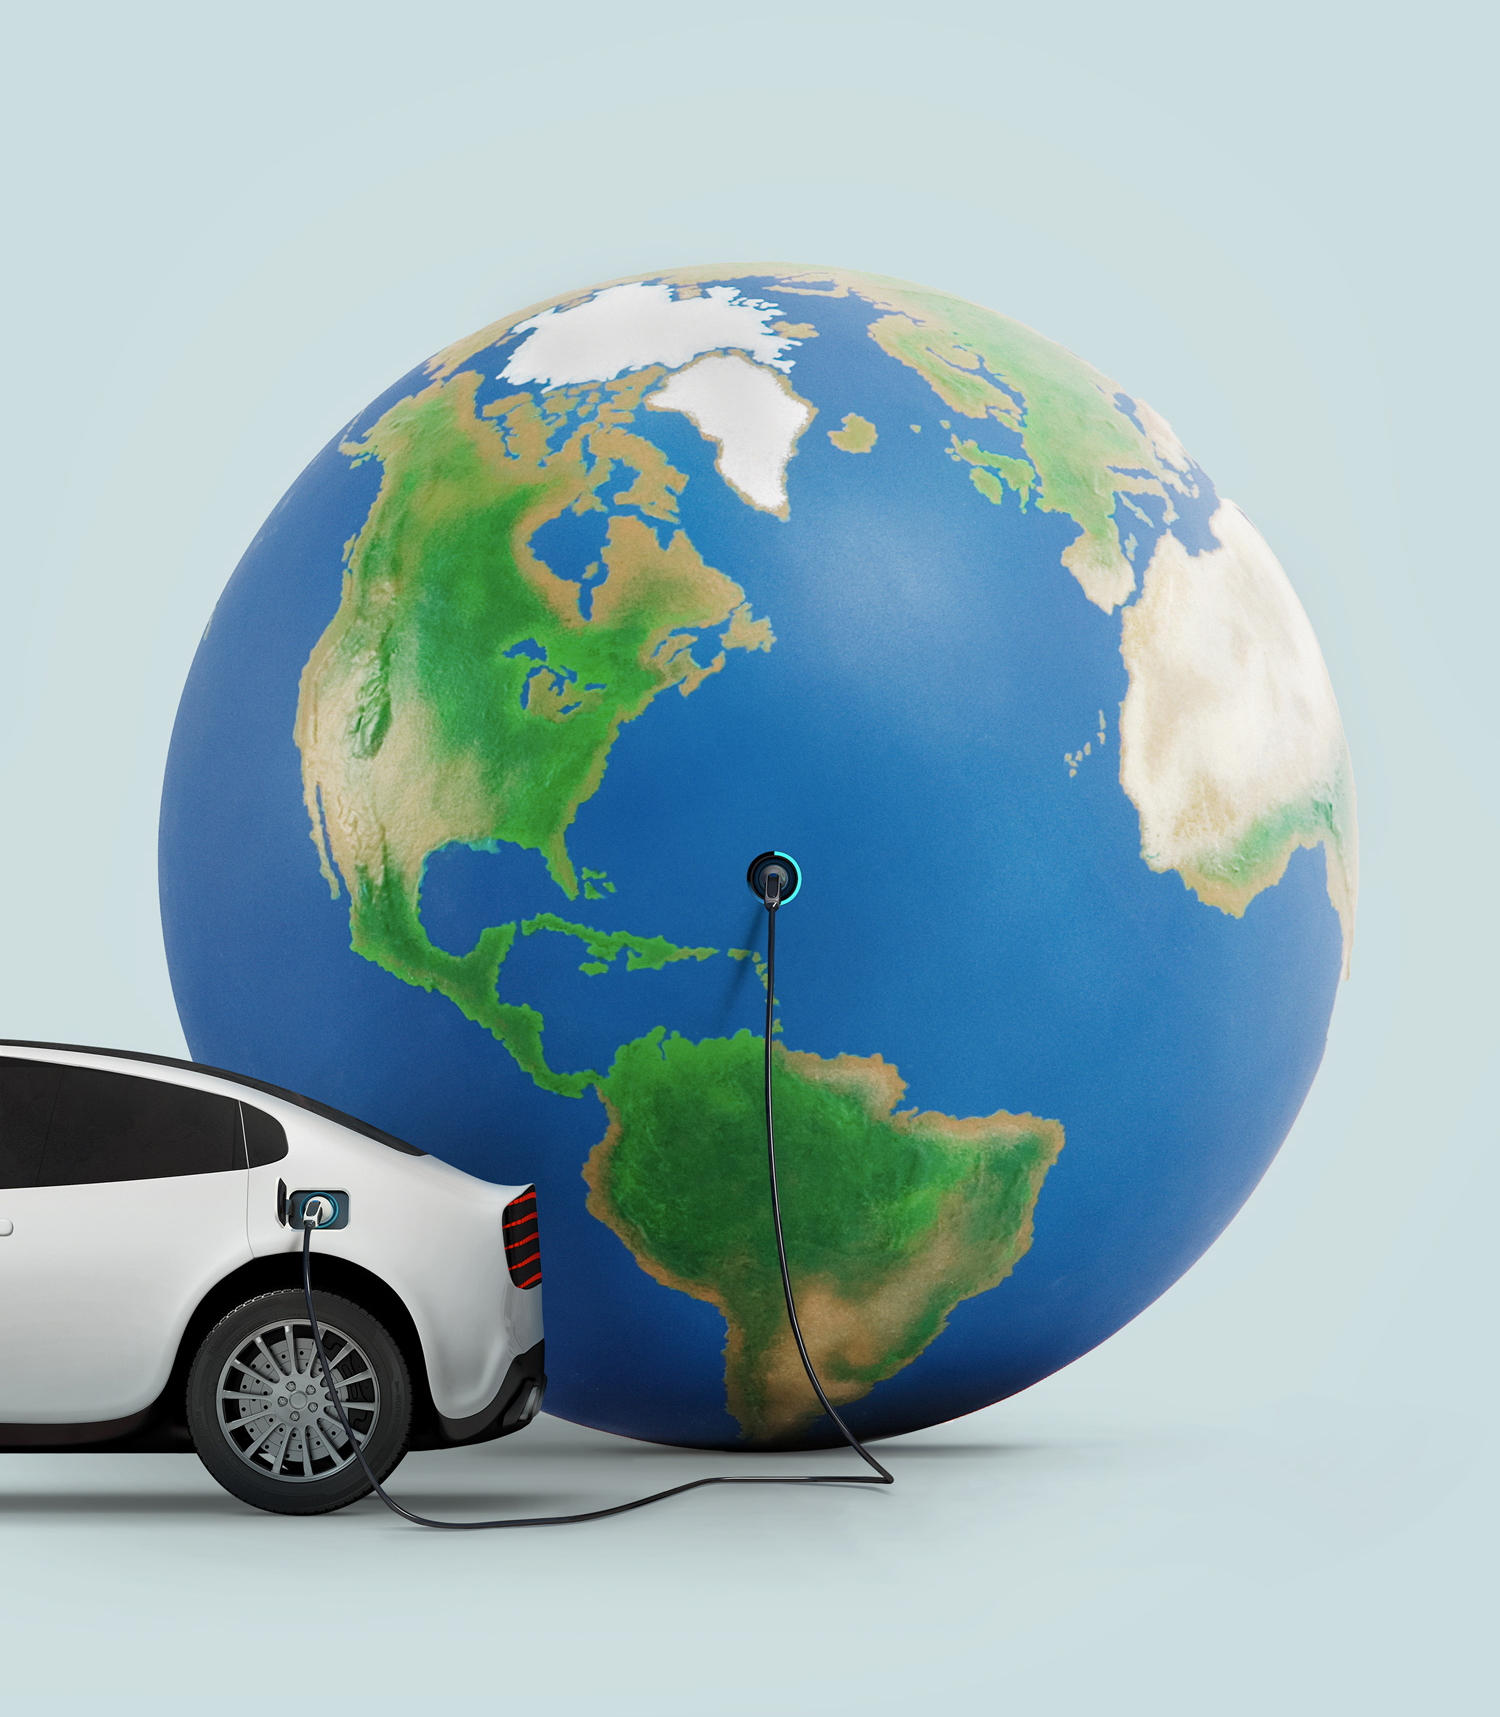 The back half of an electric car, with its charging cable plugged into a large inflated Earth globe